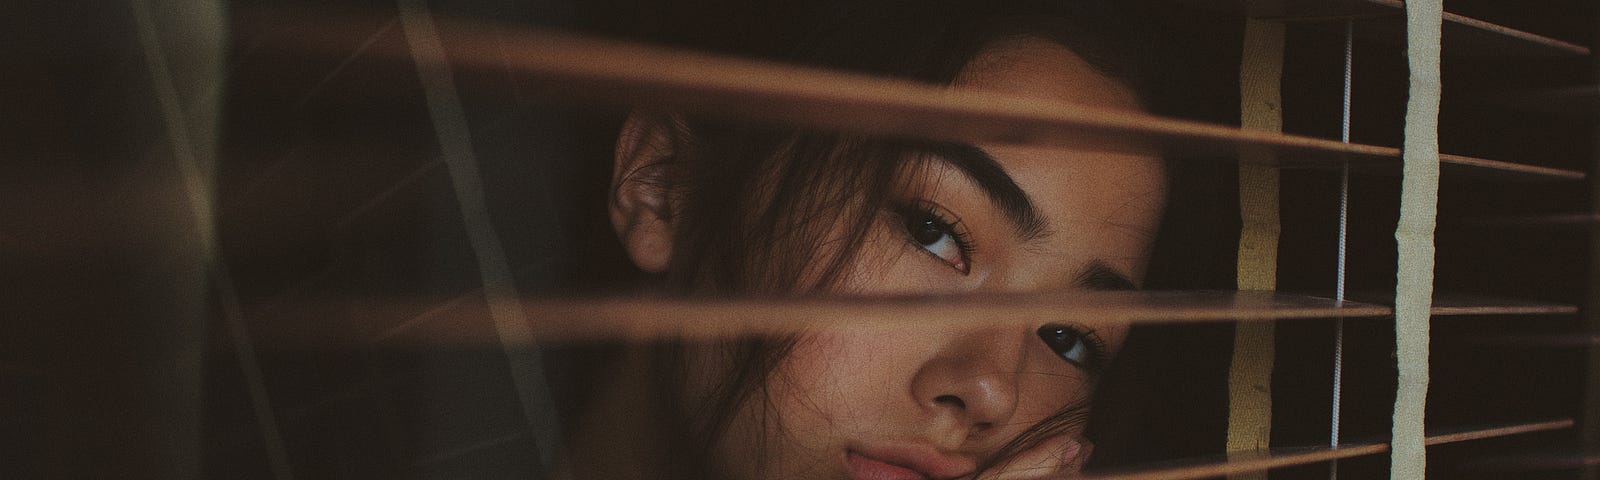 A depressed young woman peers at us through a wooden window blinds. Major Depressive Disorder (MDD) mental health condition. While clinicians commonly prescribe antidepressant medications for MDD, many do not experience full symptom relief. This essay unveils the surprising link between probiotics, anxiety, and depression.